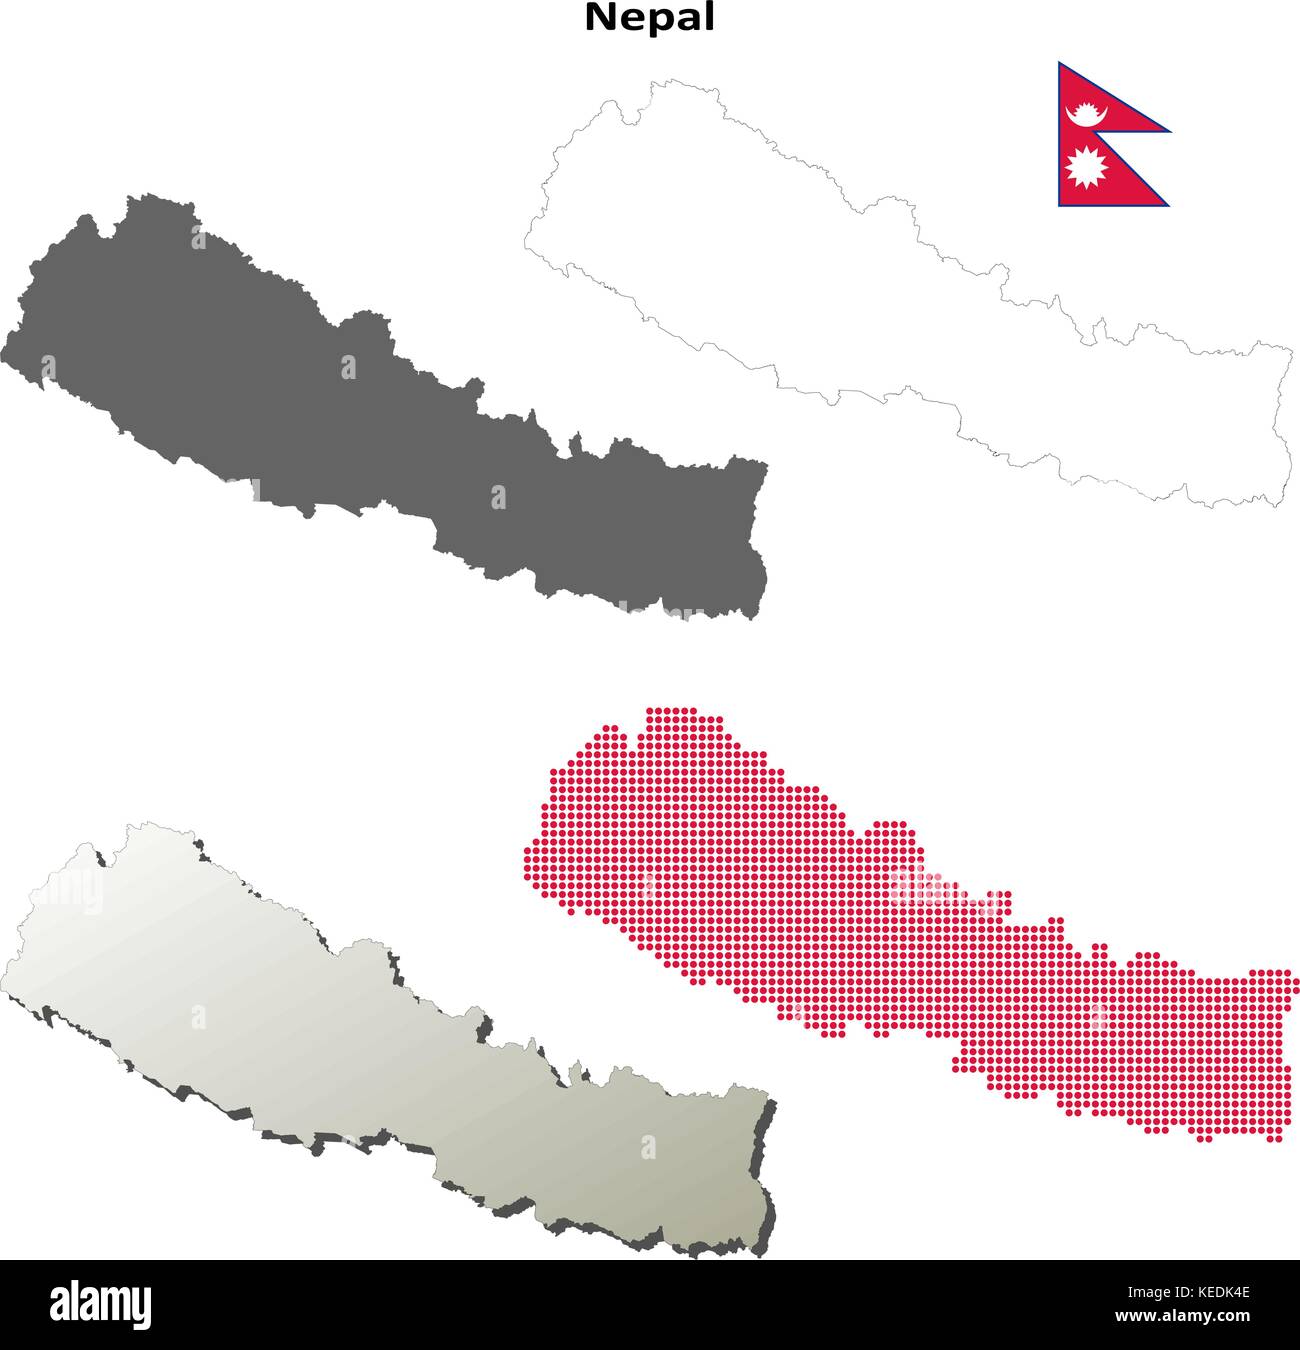 Nepal outline map set Stock Vector